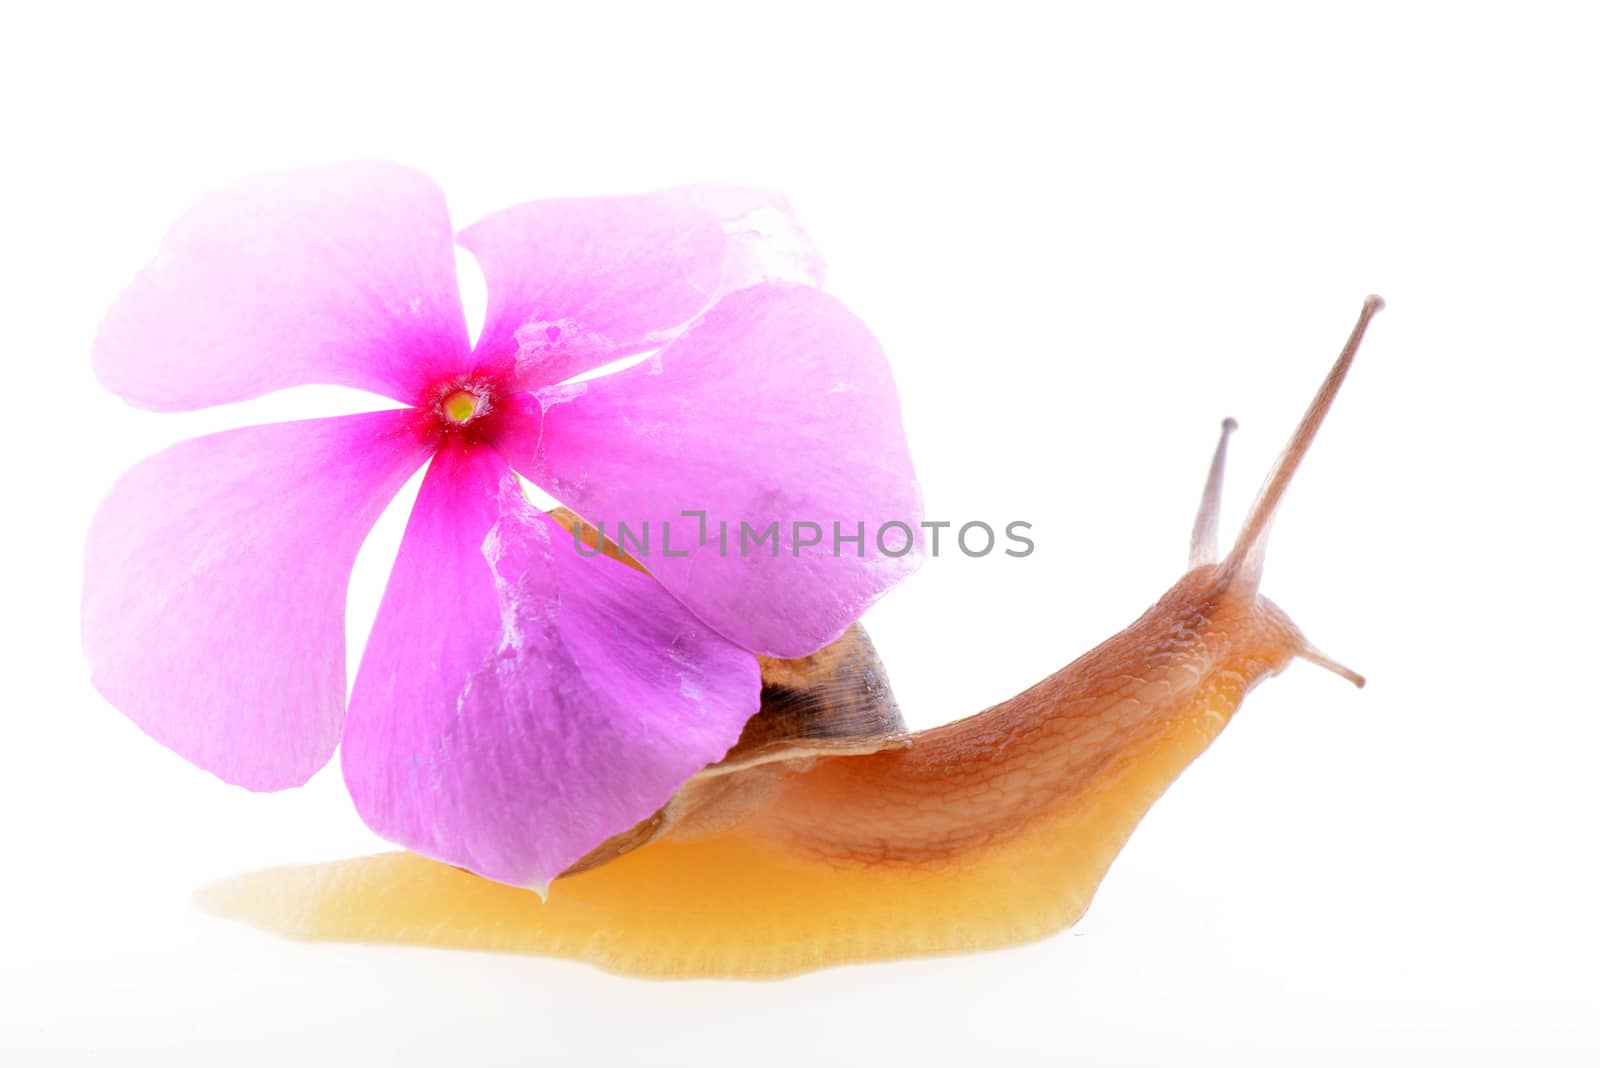 Snail with purple flower on a white background by bbbar